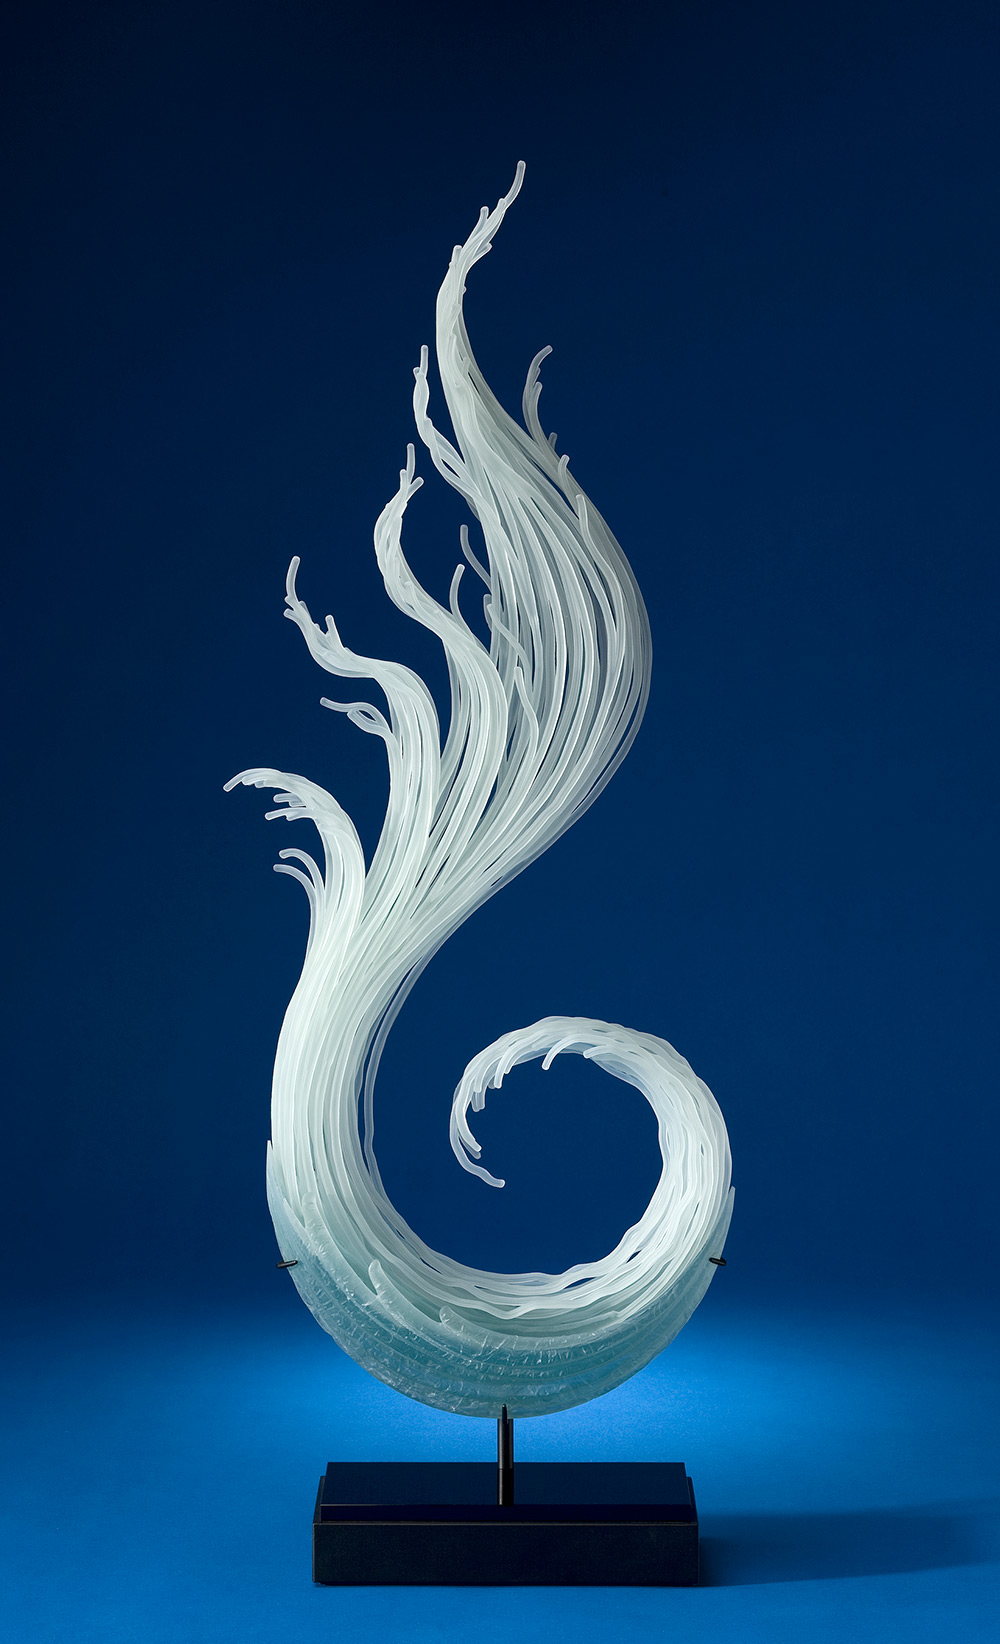 Sublime Glass Sculptures Inspired By Waves And Sea Creatures By K. William Lequier (9)